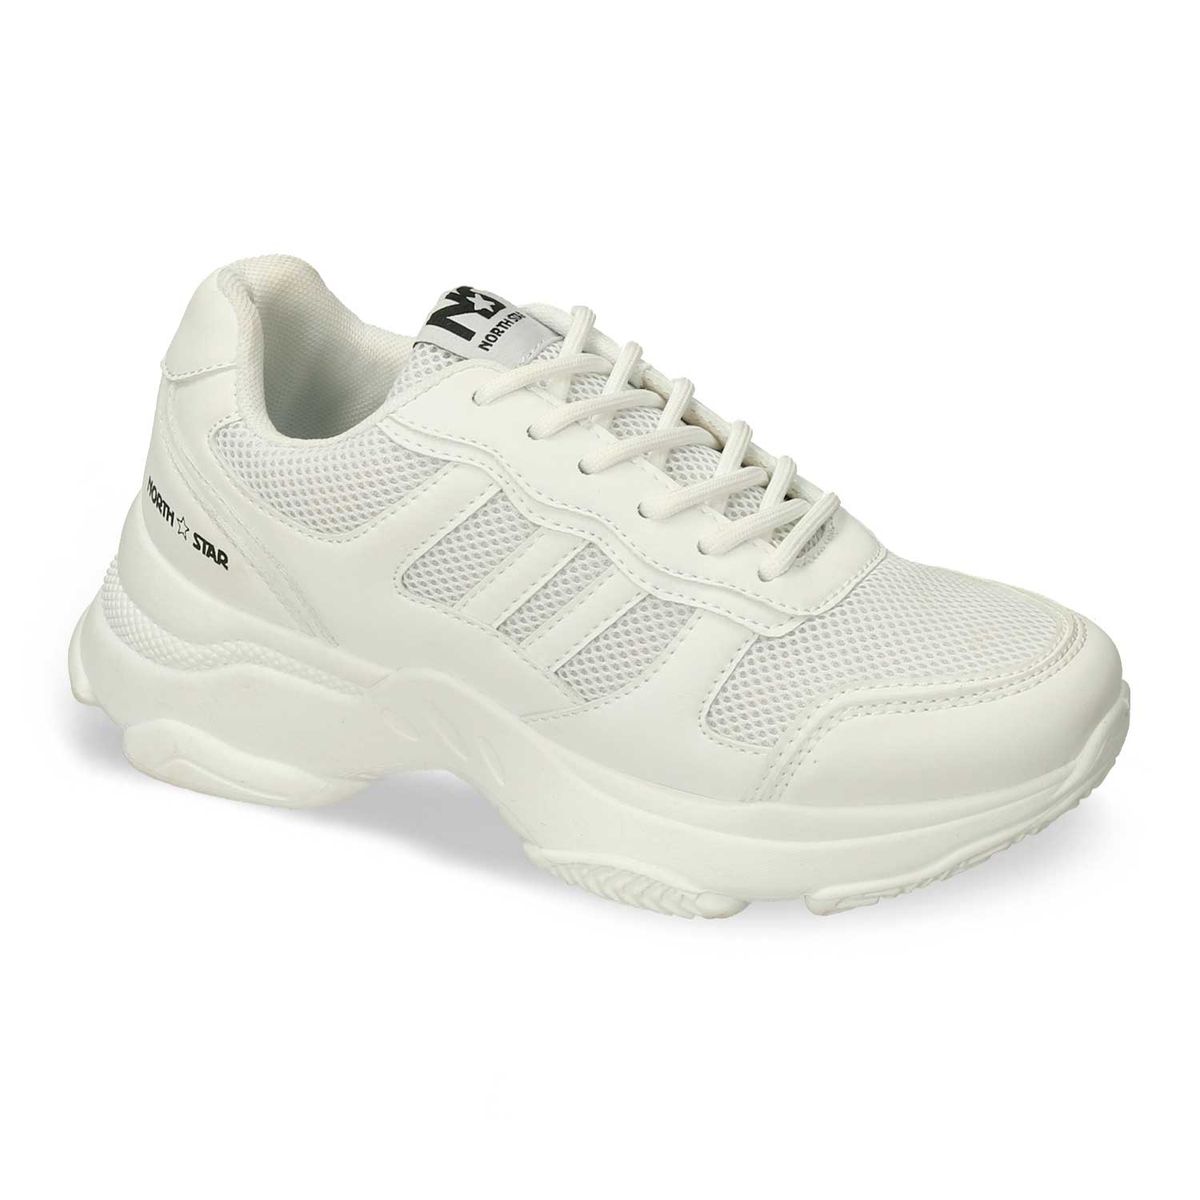 Tenis Casuales Blanco North Star Gabarti Aoon Mujer